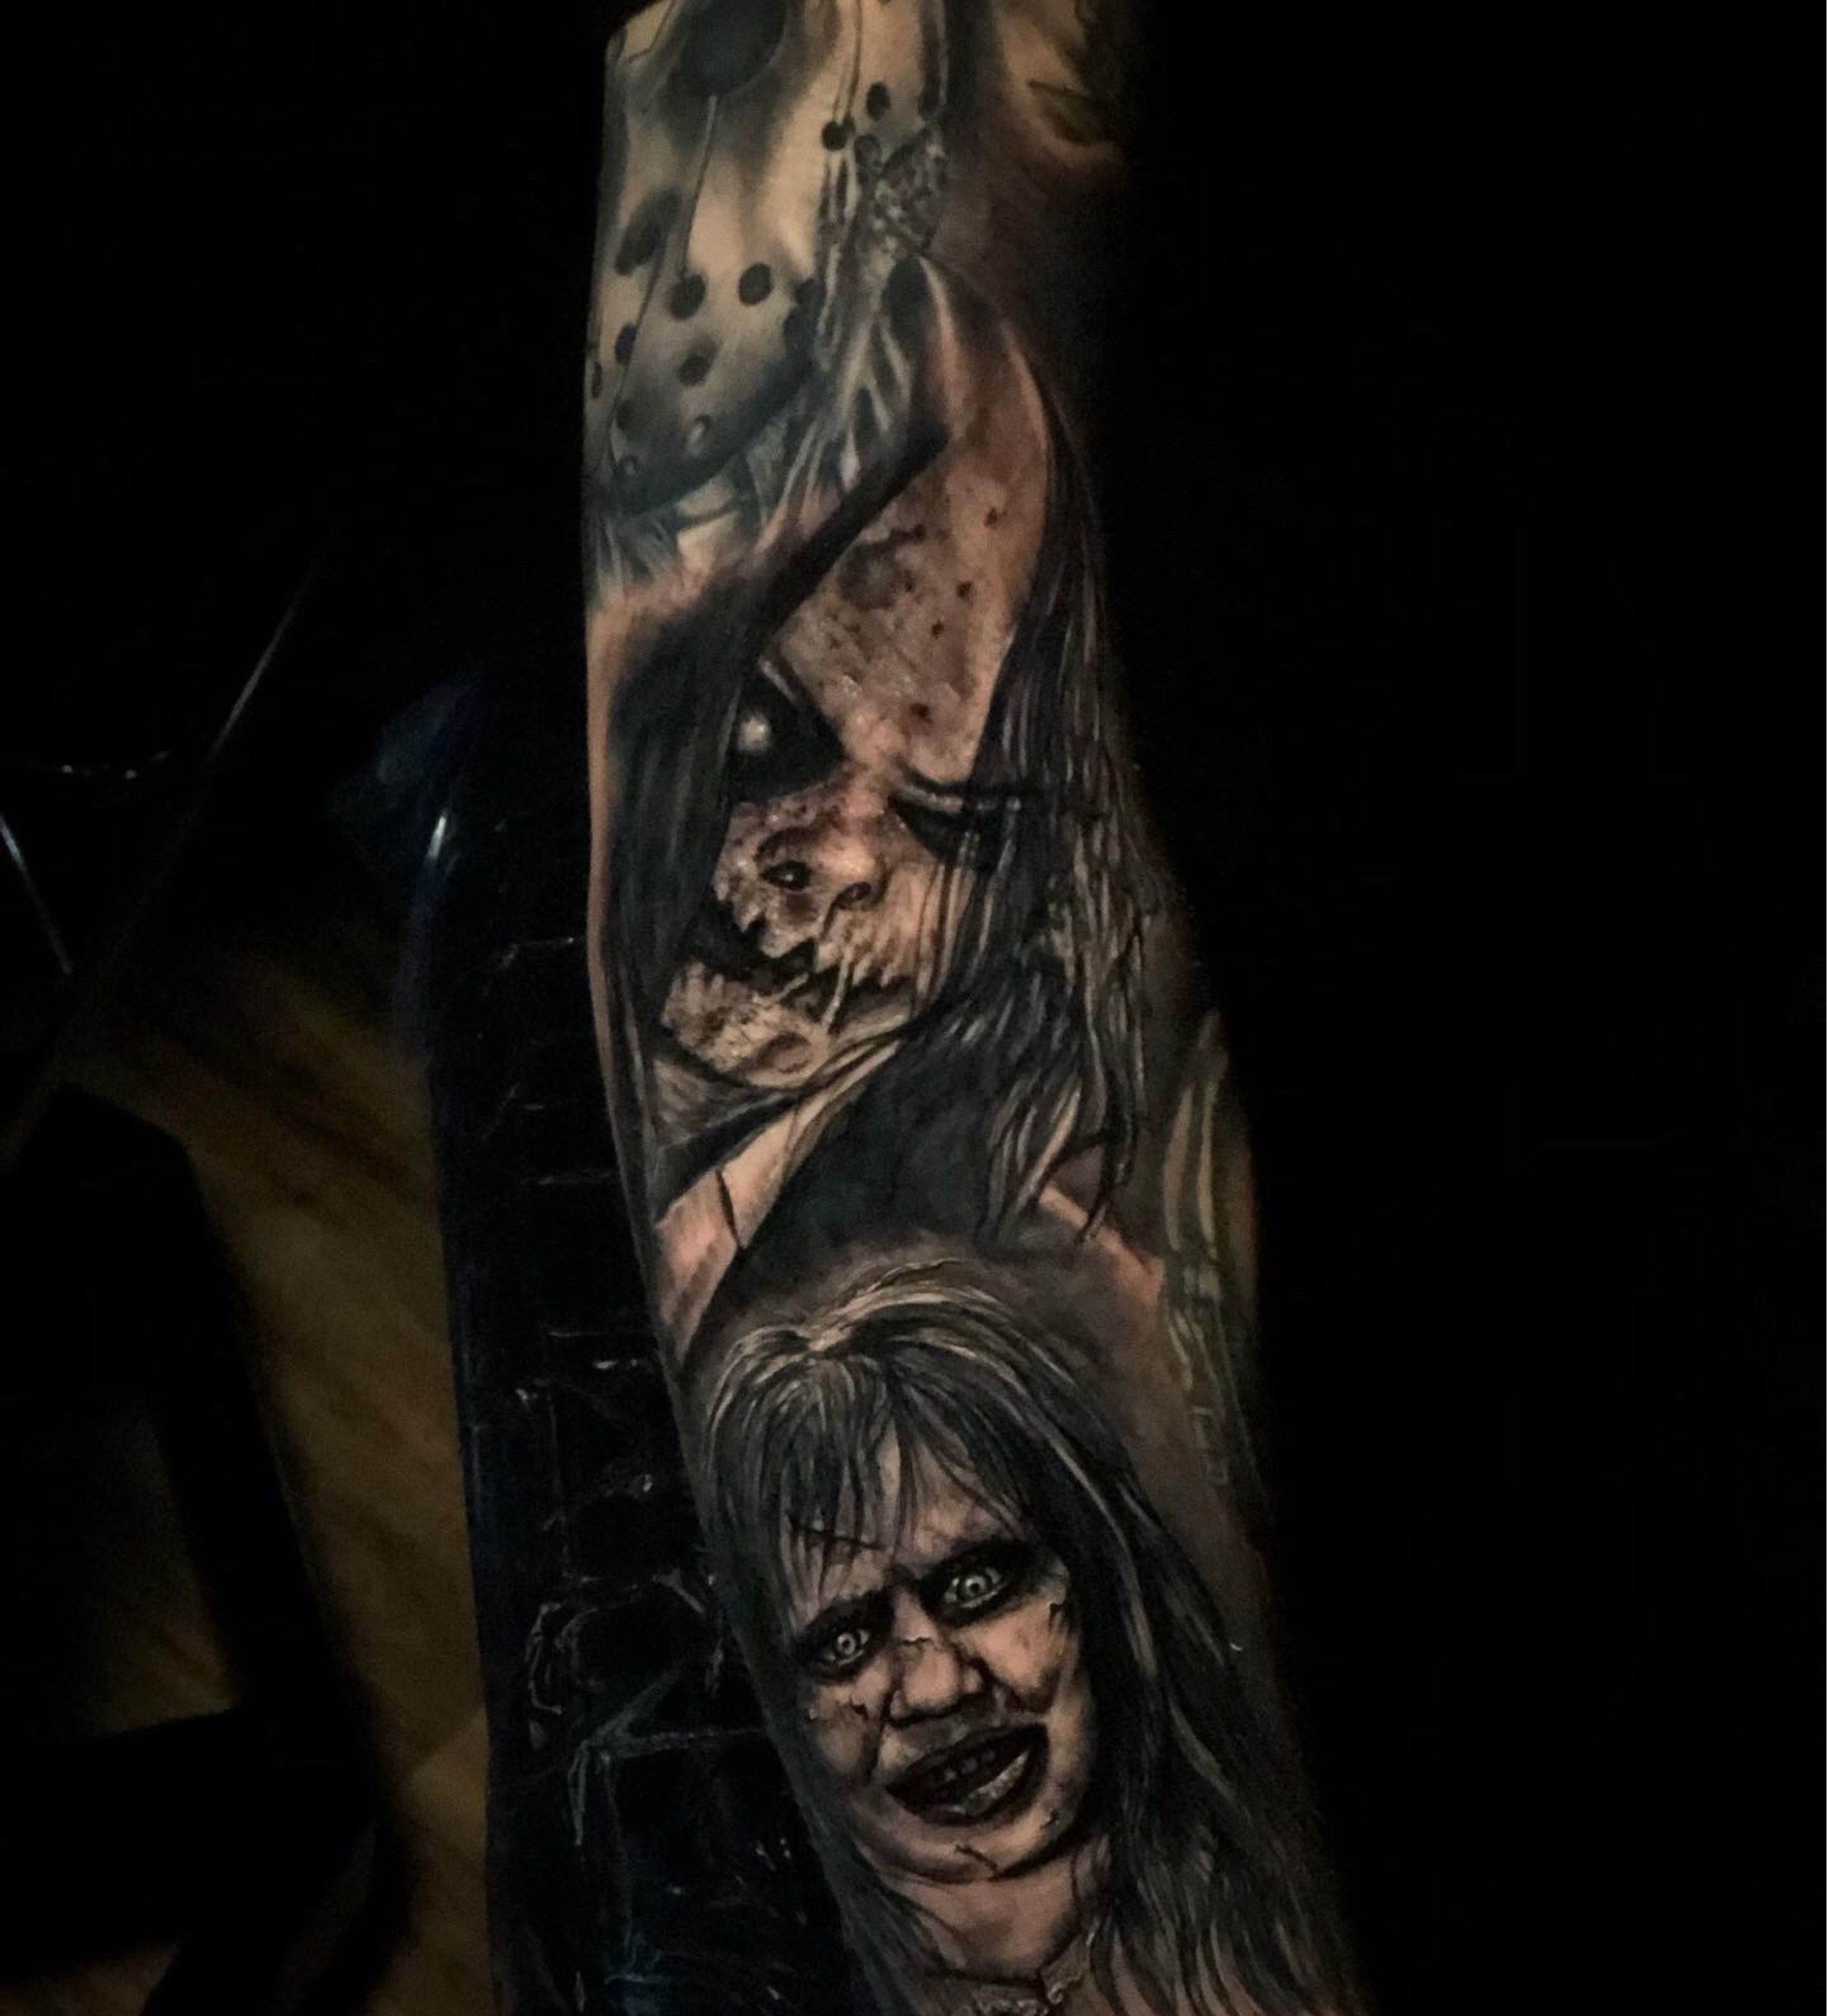 Finished up lower leg horror sleeve with Pennywise Artist Steven House at  Zombie Tattoo in Norco Ca  rtattoos